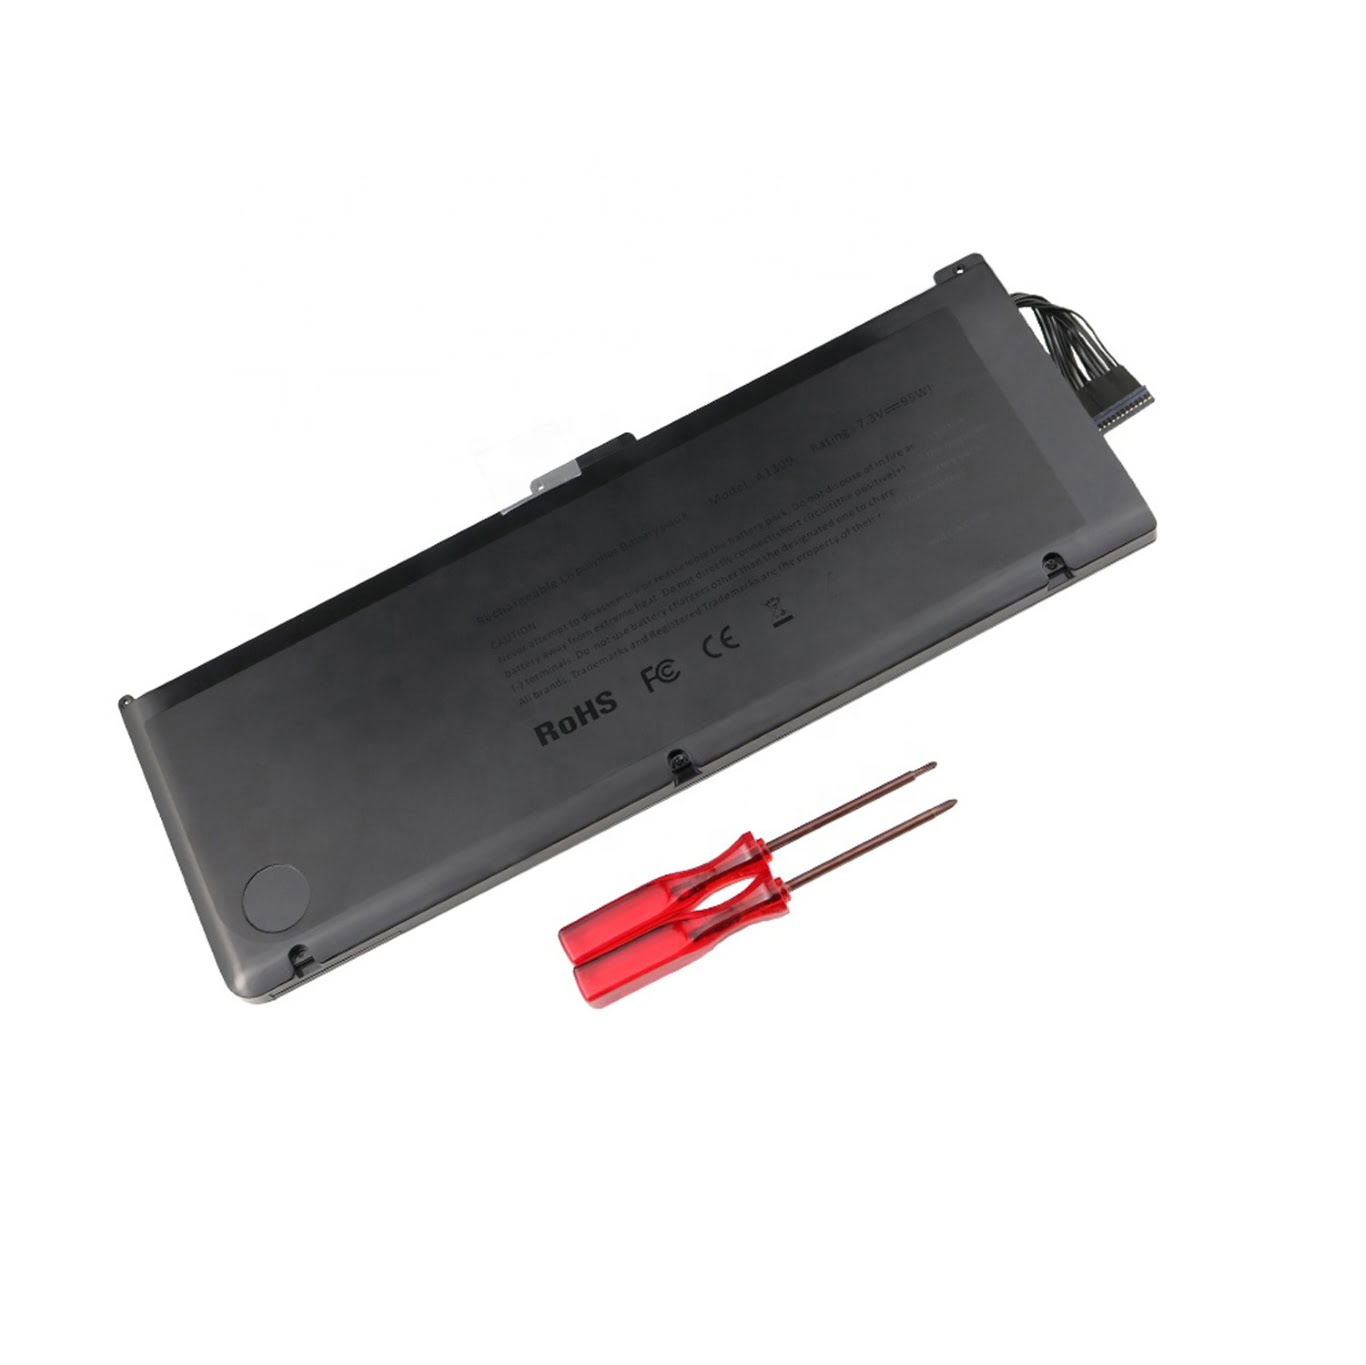 020-6313-C, 661-5037-A replacement Laptop Battery for Apple MacBook Pro 17